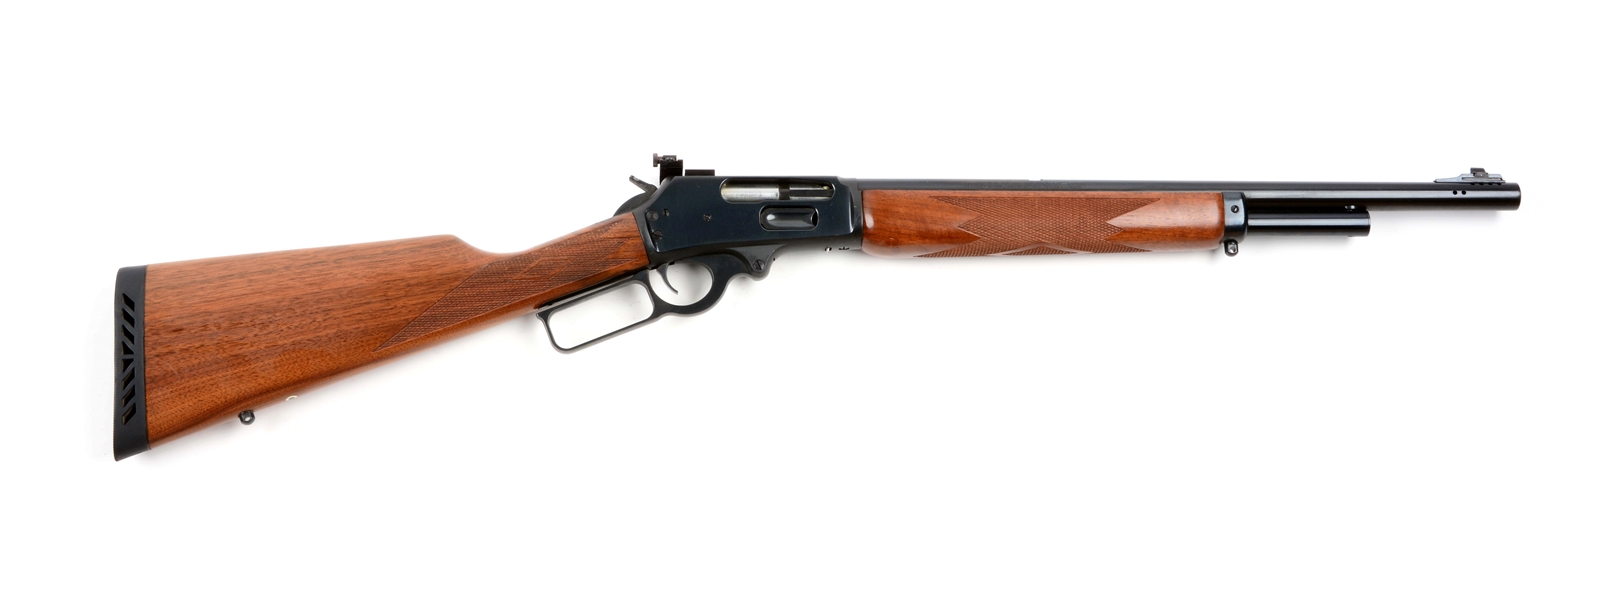 (M) MARLIN MODEL 1895G LEVER ACTION RIFLE.